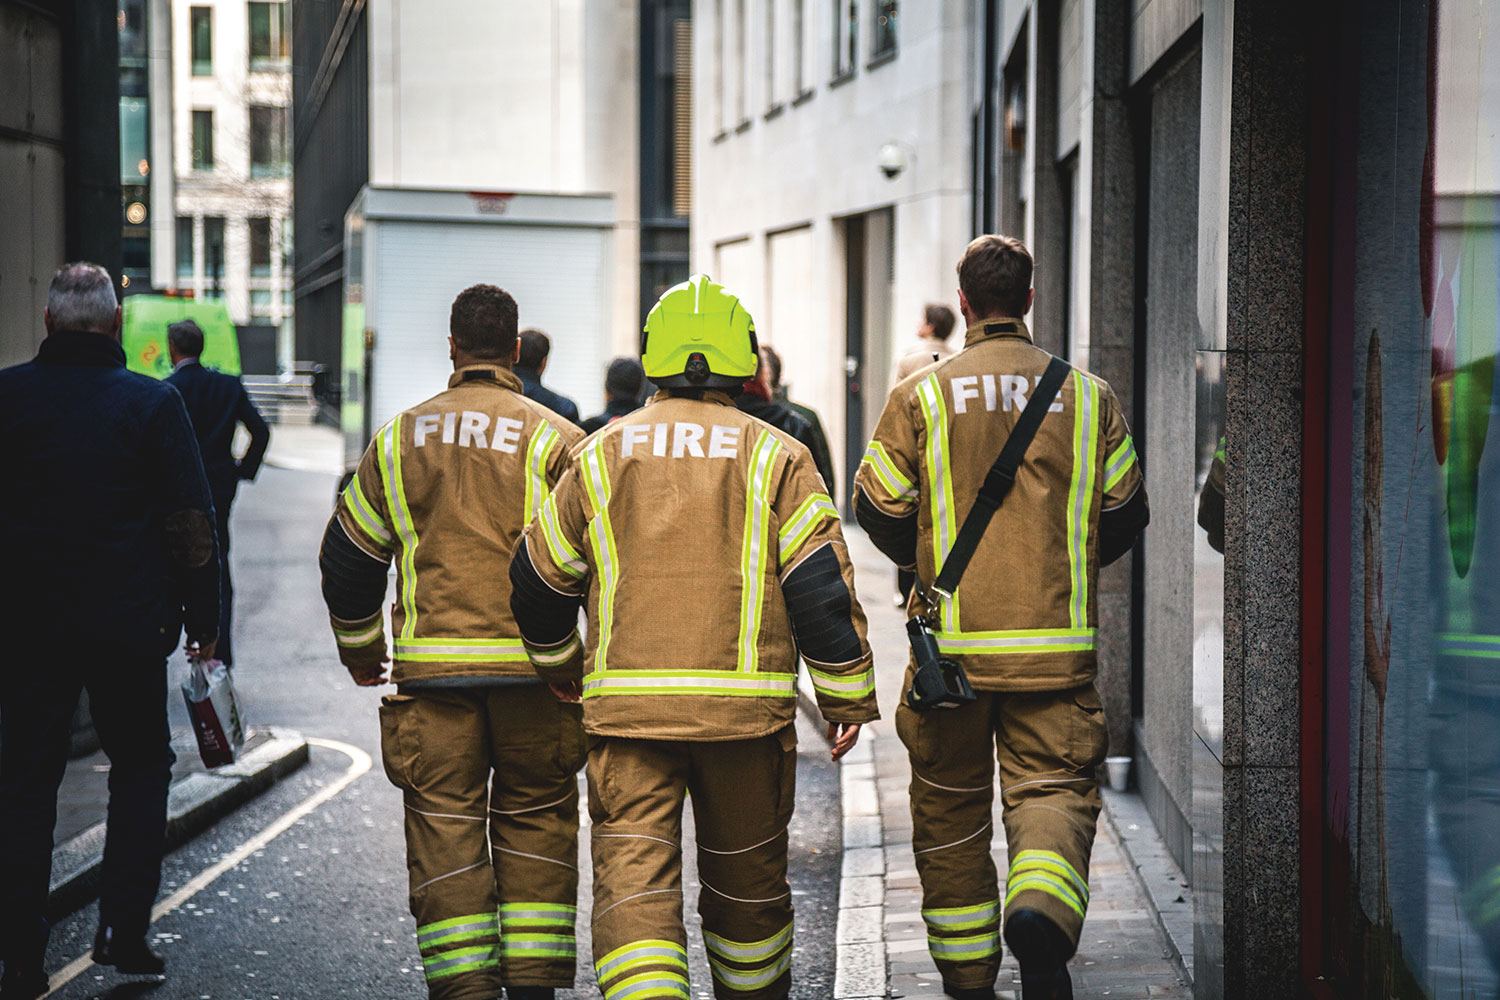 photo of group of three firefighters, one wearing a helmet, pictured from behind walking up a lane with buildings either side and passersby